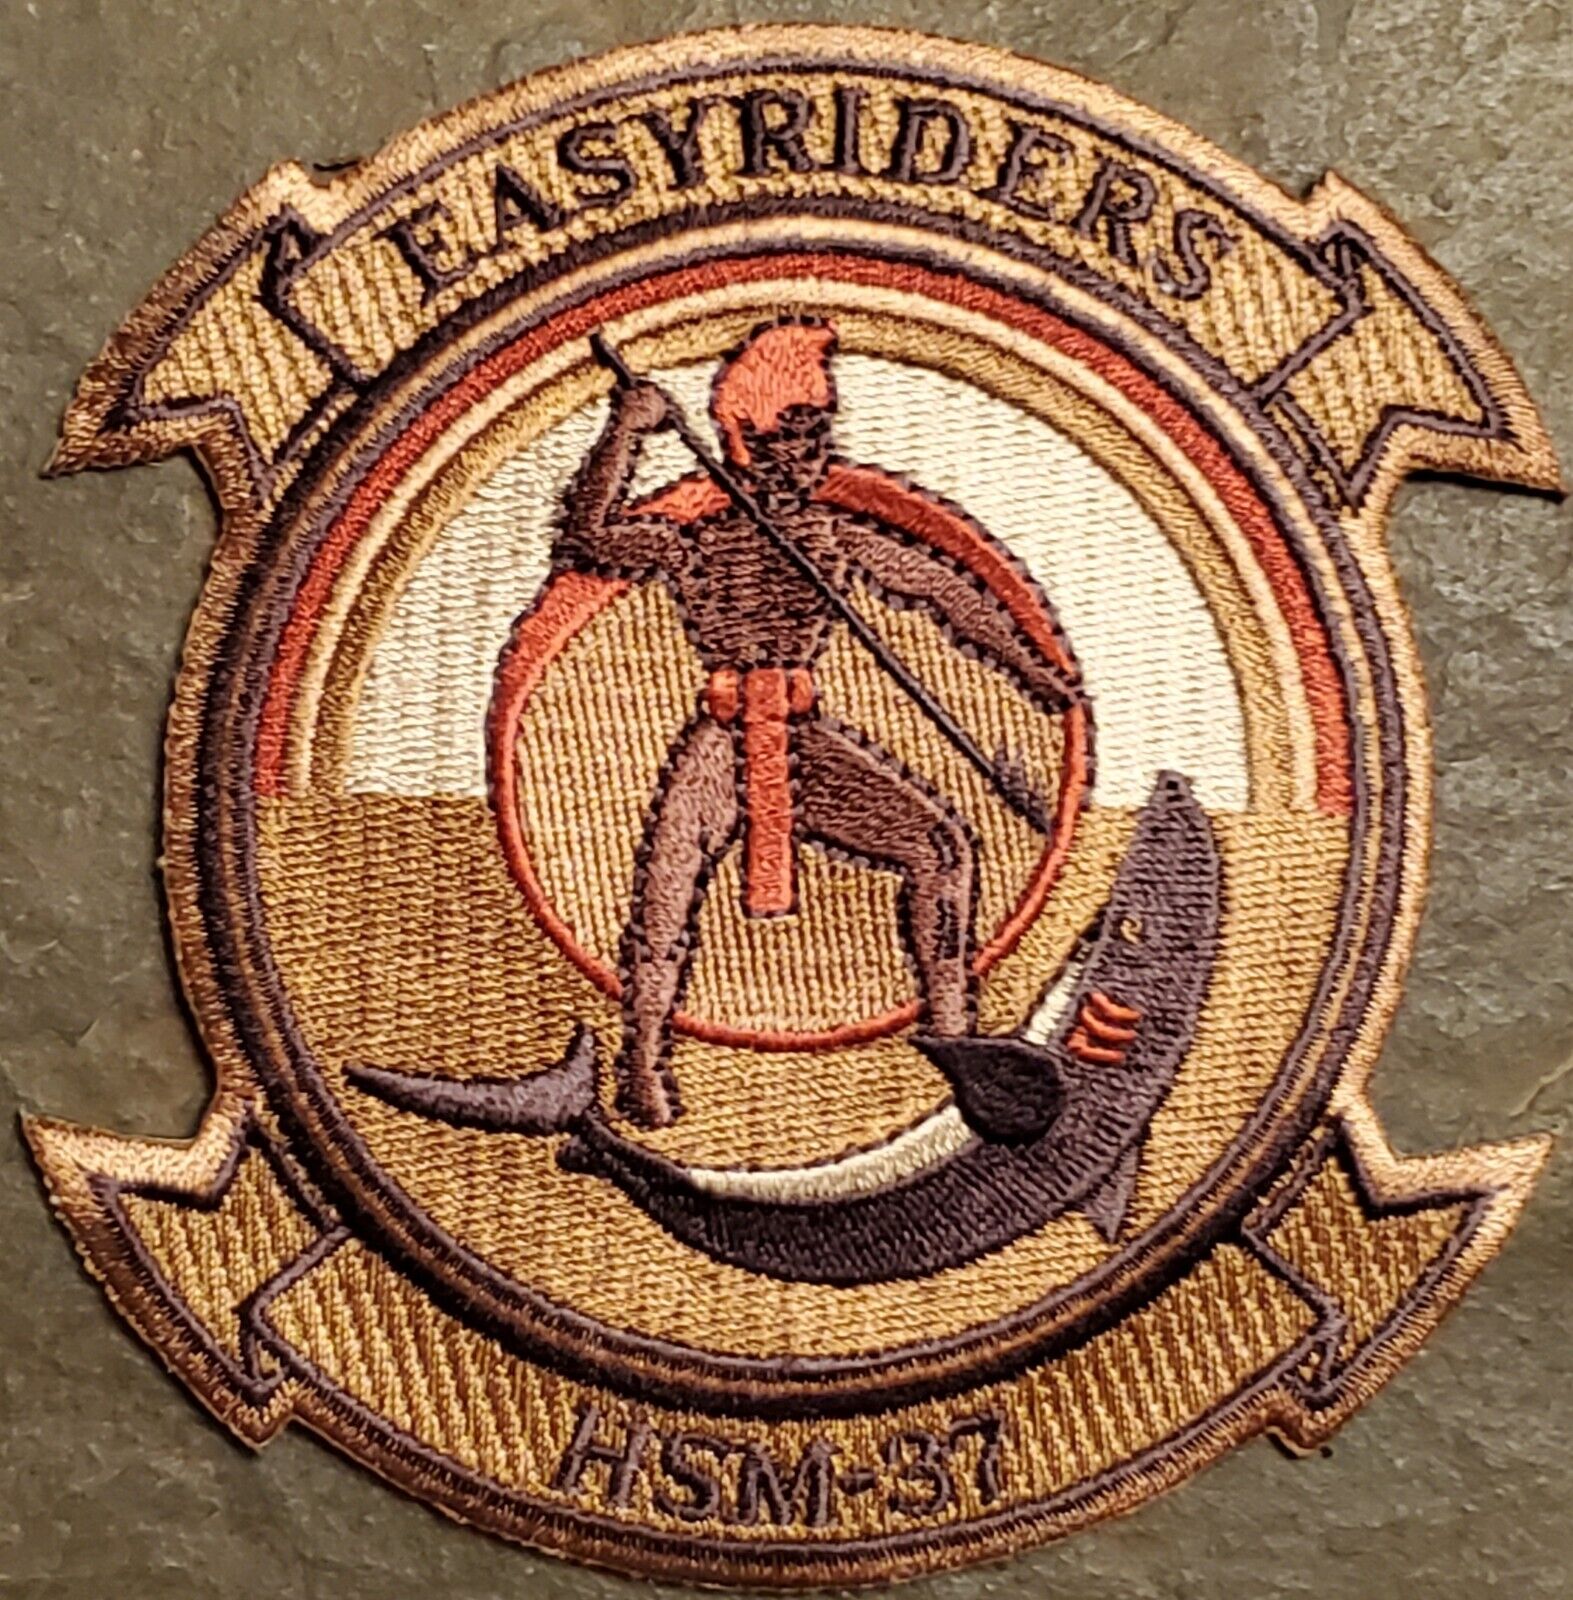 USN NAVY PATCH HSM-37 EASYRIDERS DESERT PATCH HELICOPTER MARITIME STRIKE SQDN